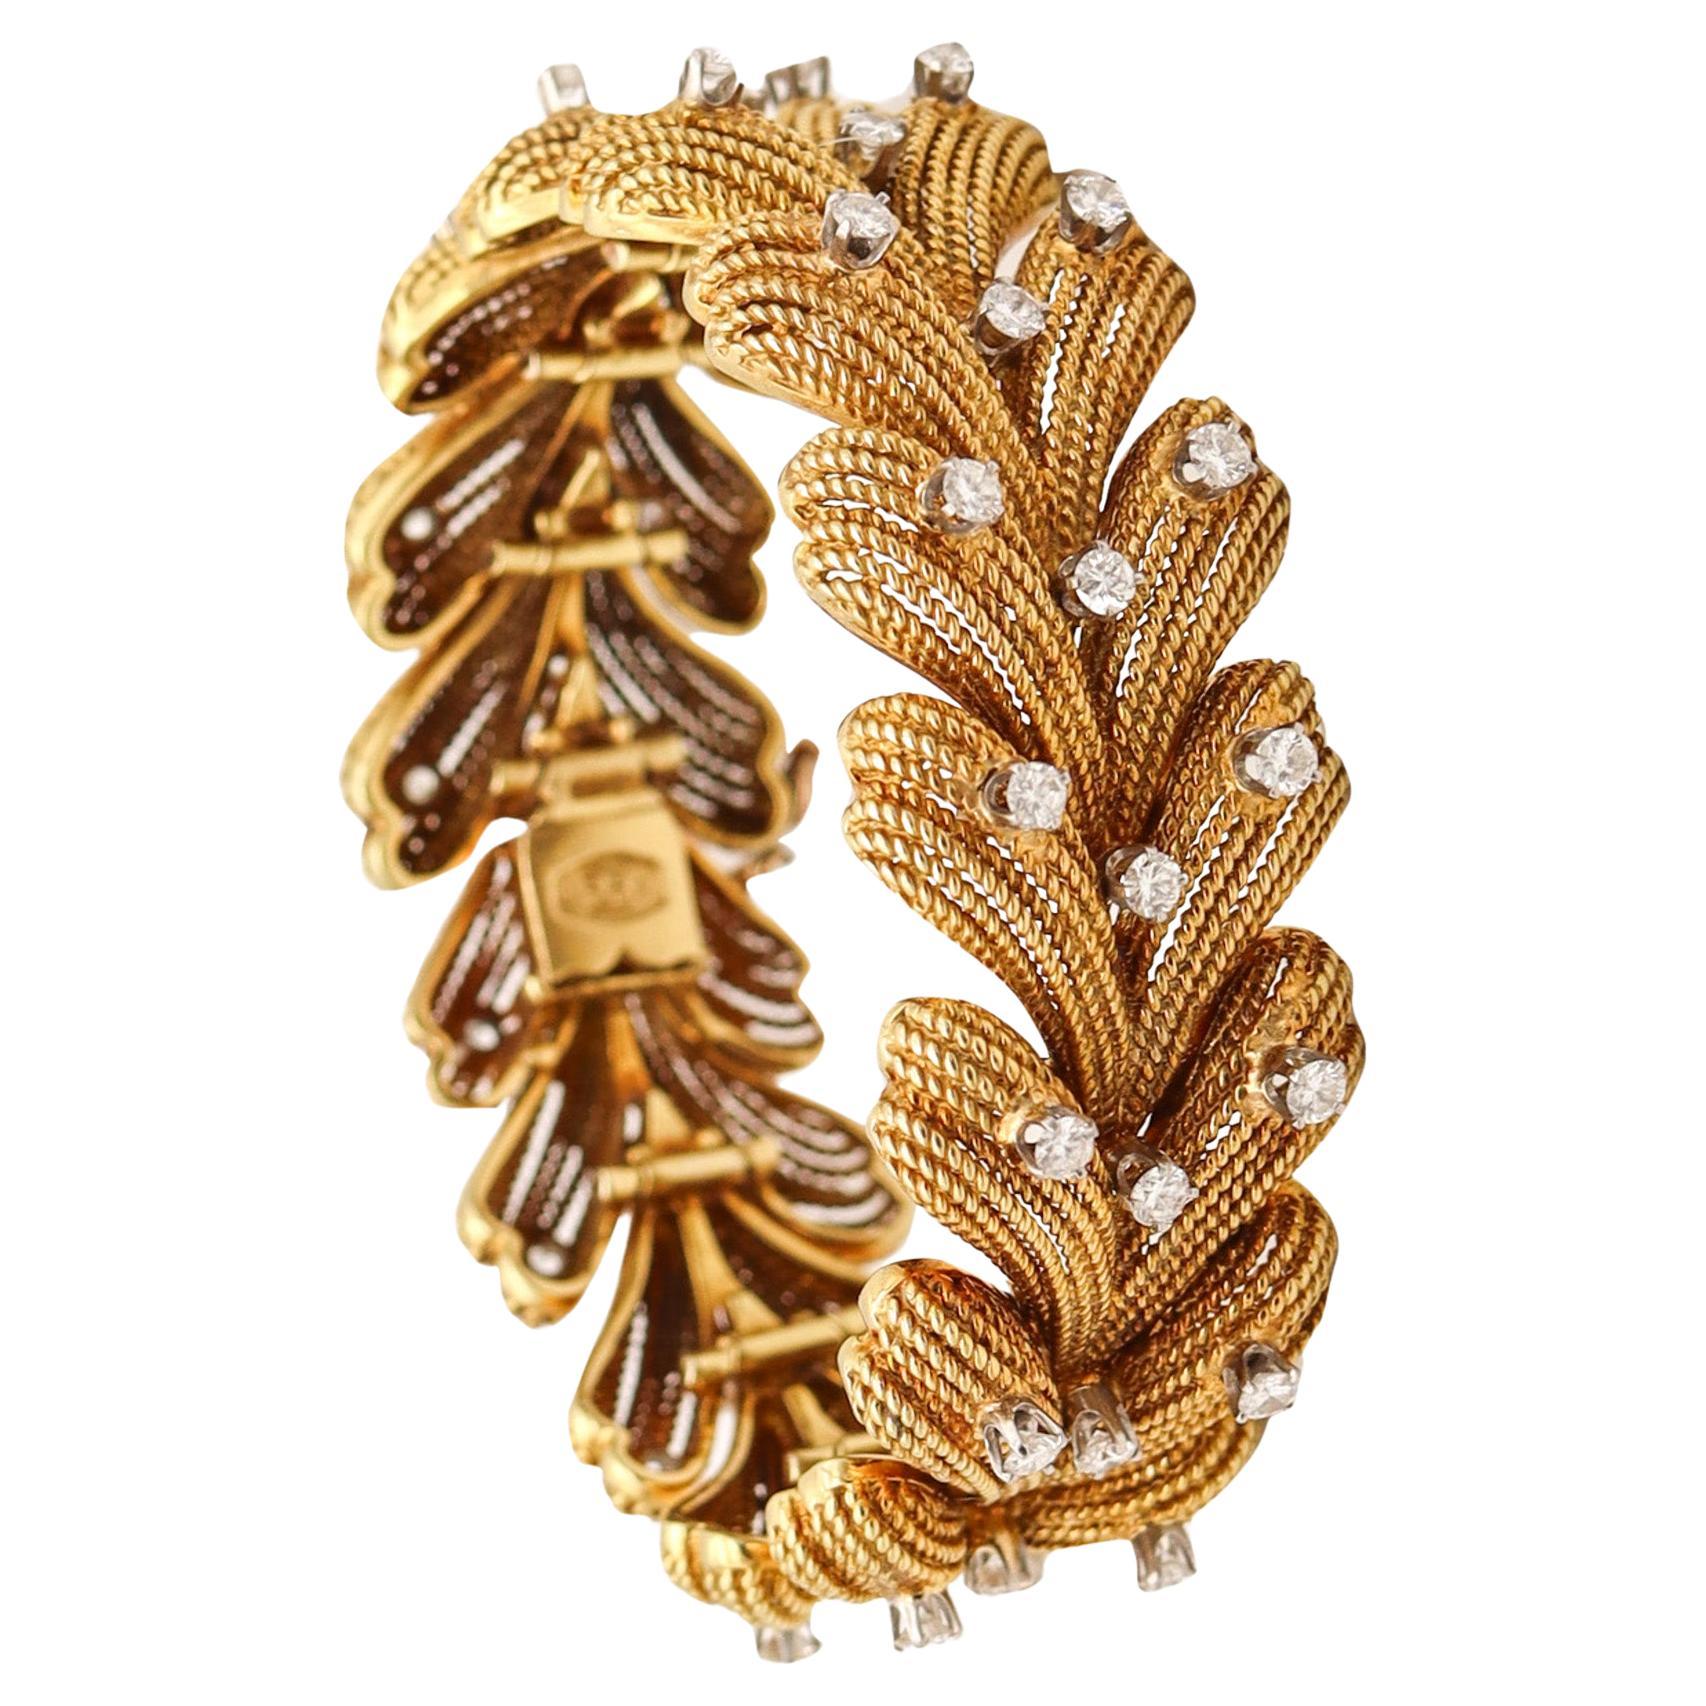 La Triomphe 1970 Modernist Wired Bracelet 18Kt Gold With 4.50 Ctw In Diamonds For Sale